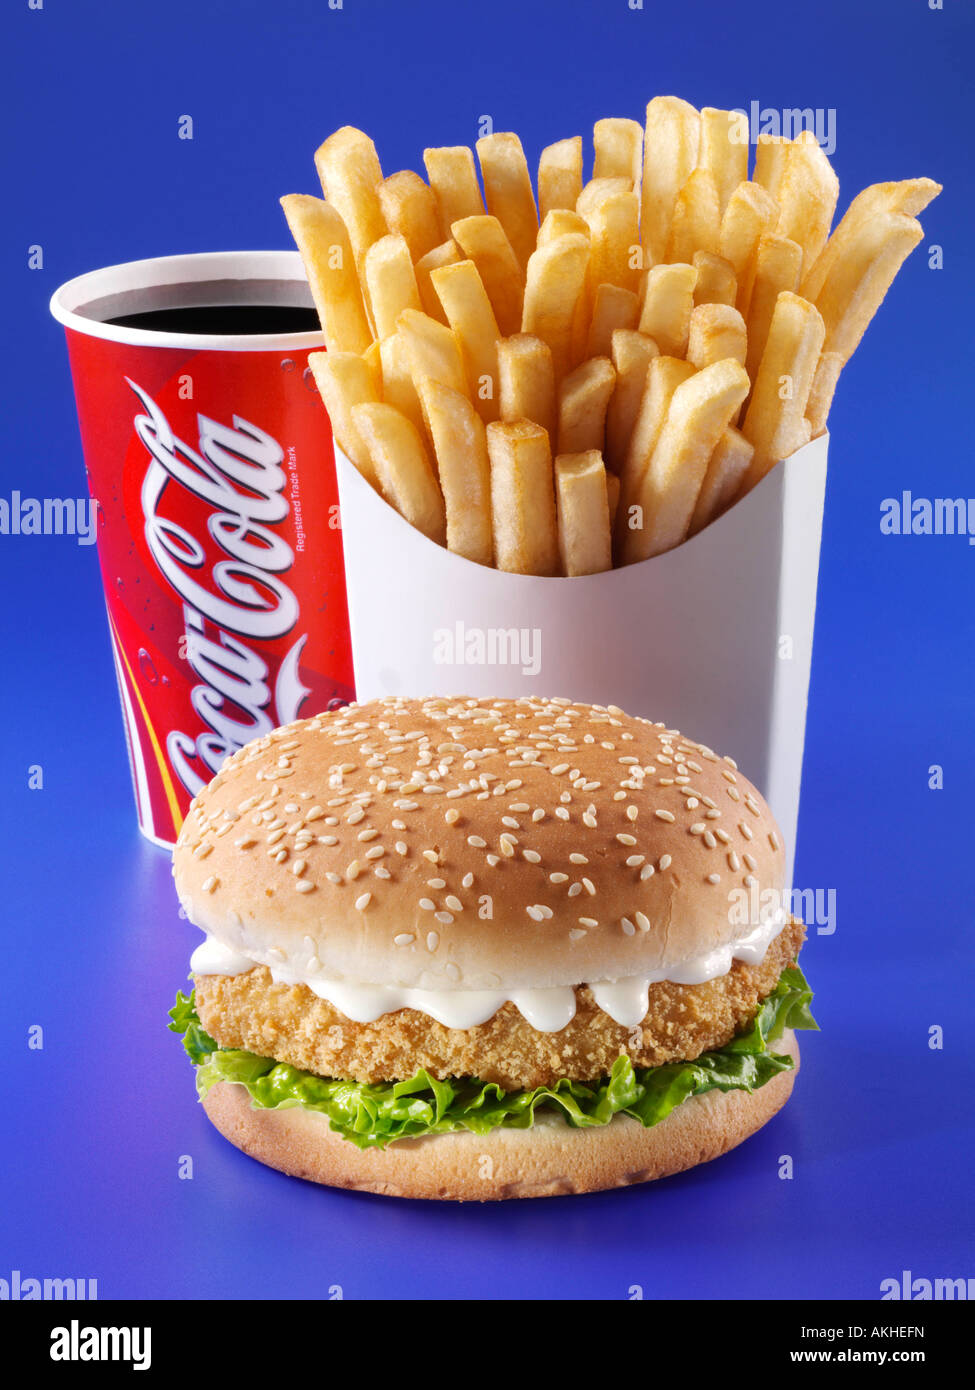 Chicken burger French fries coke editorial junk food Stock Photo - Alamy